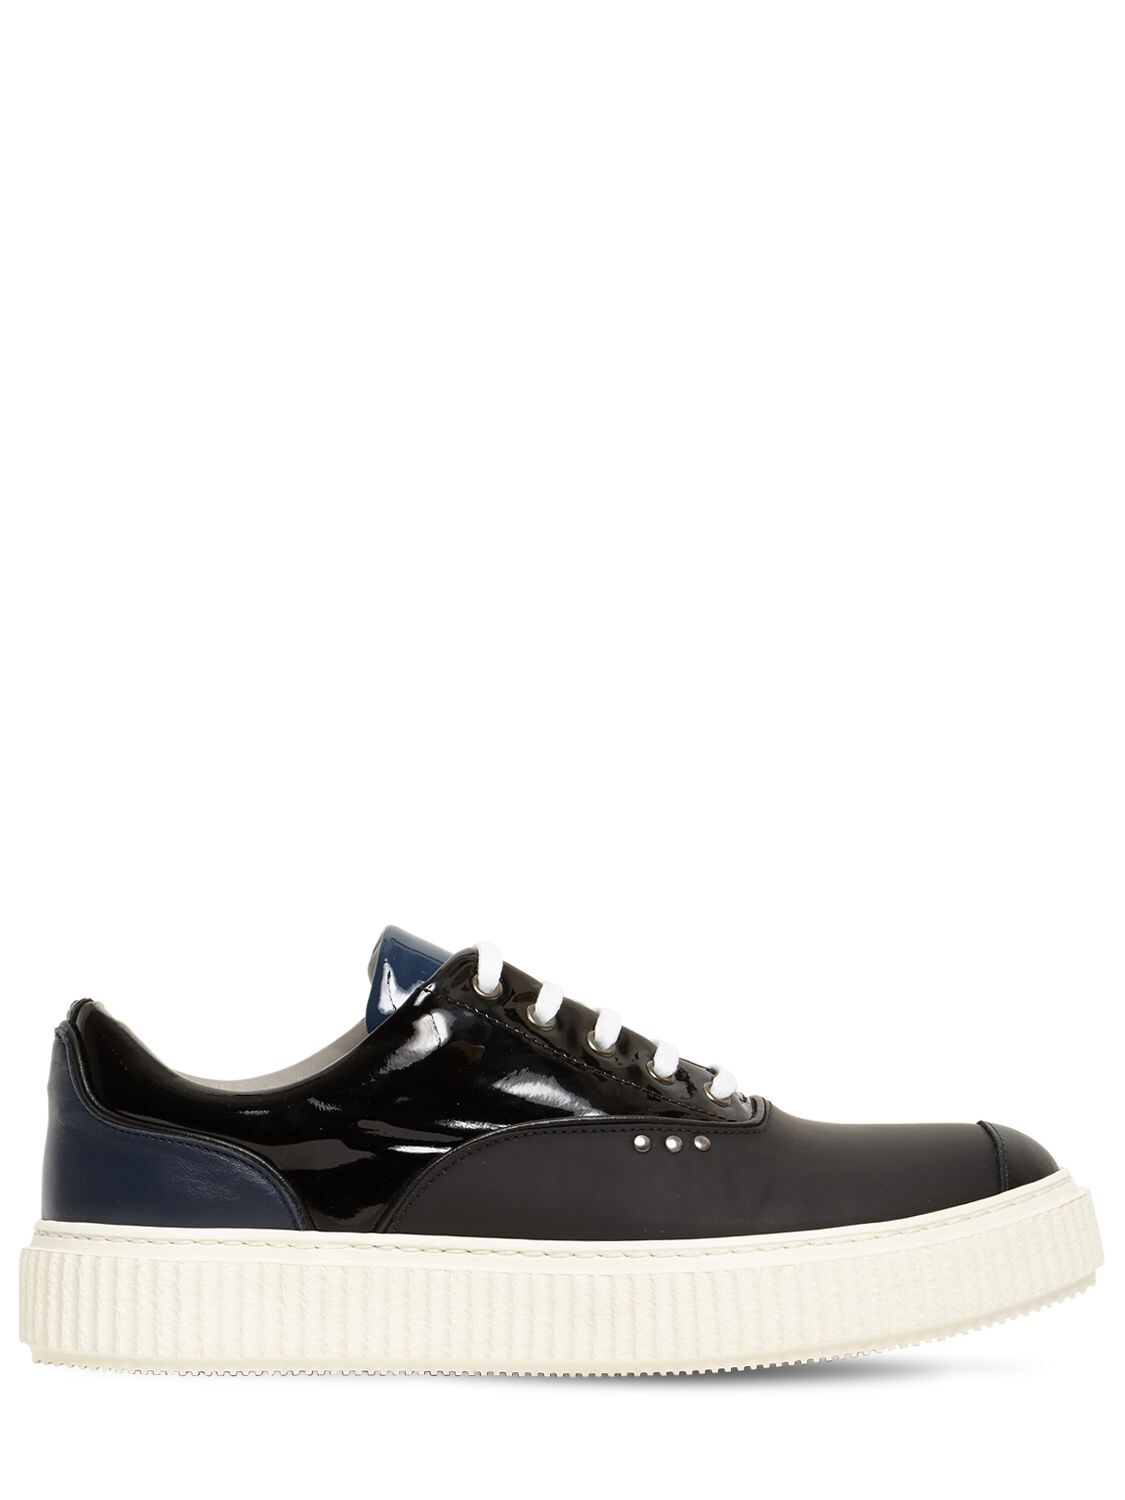 Me.land Low Top Patent Leather Sneakers In Black,blue